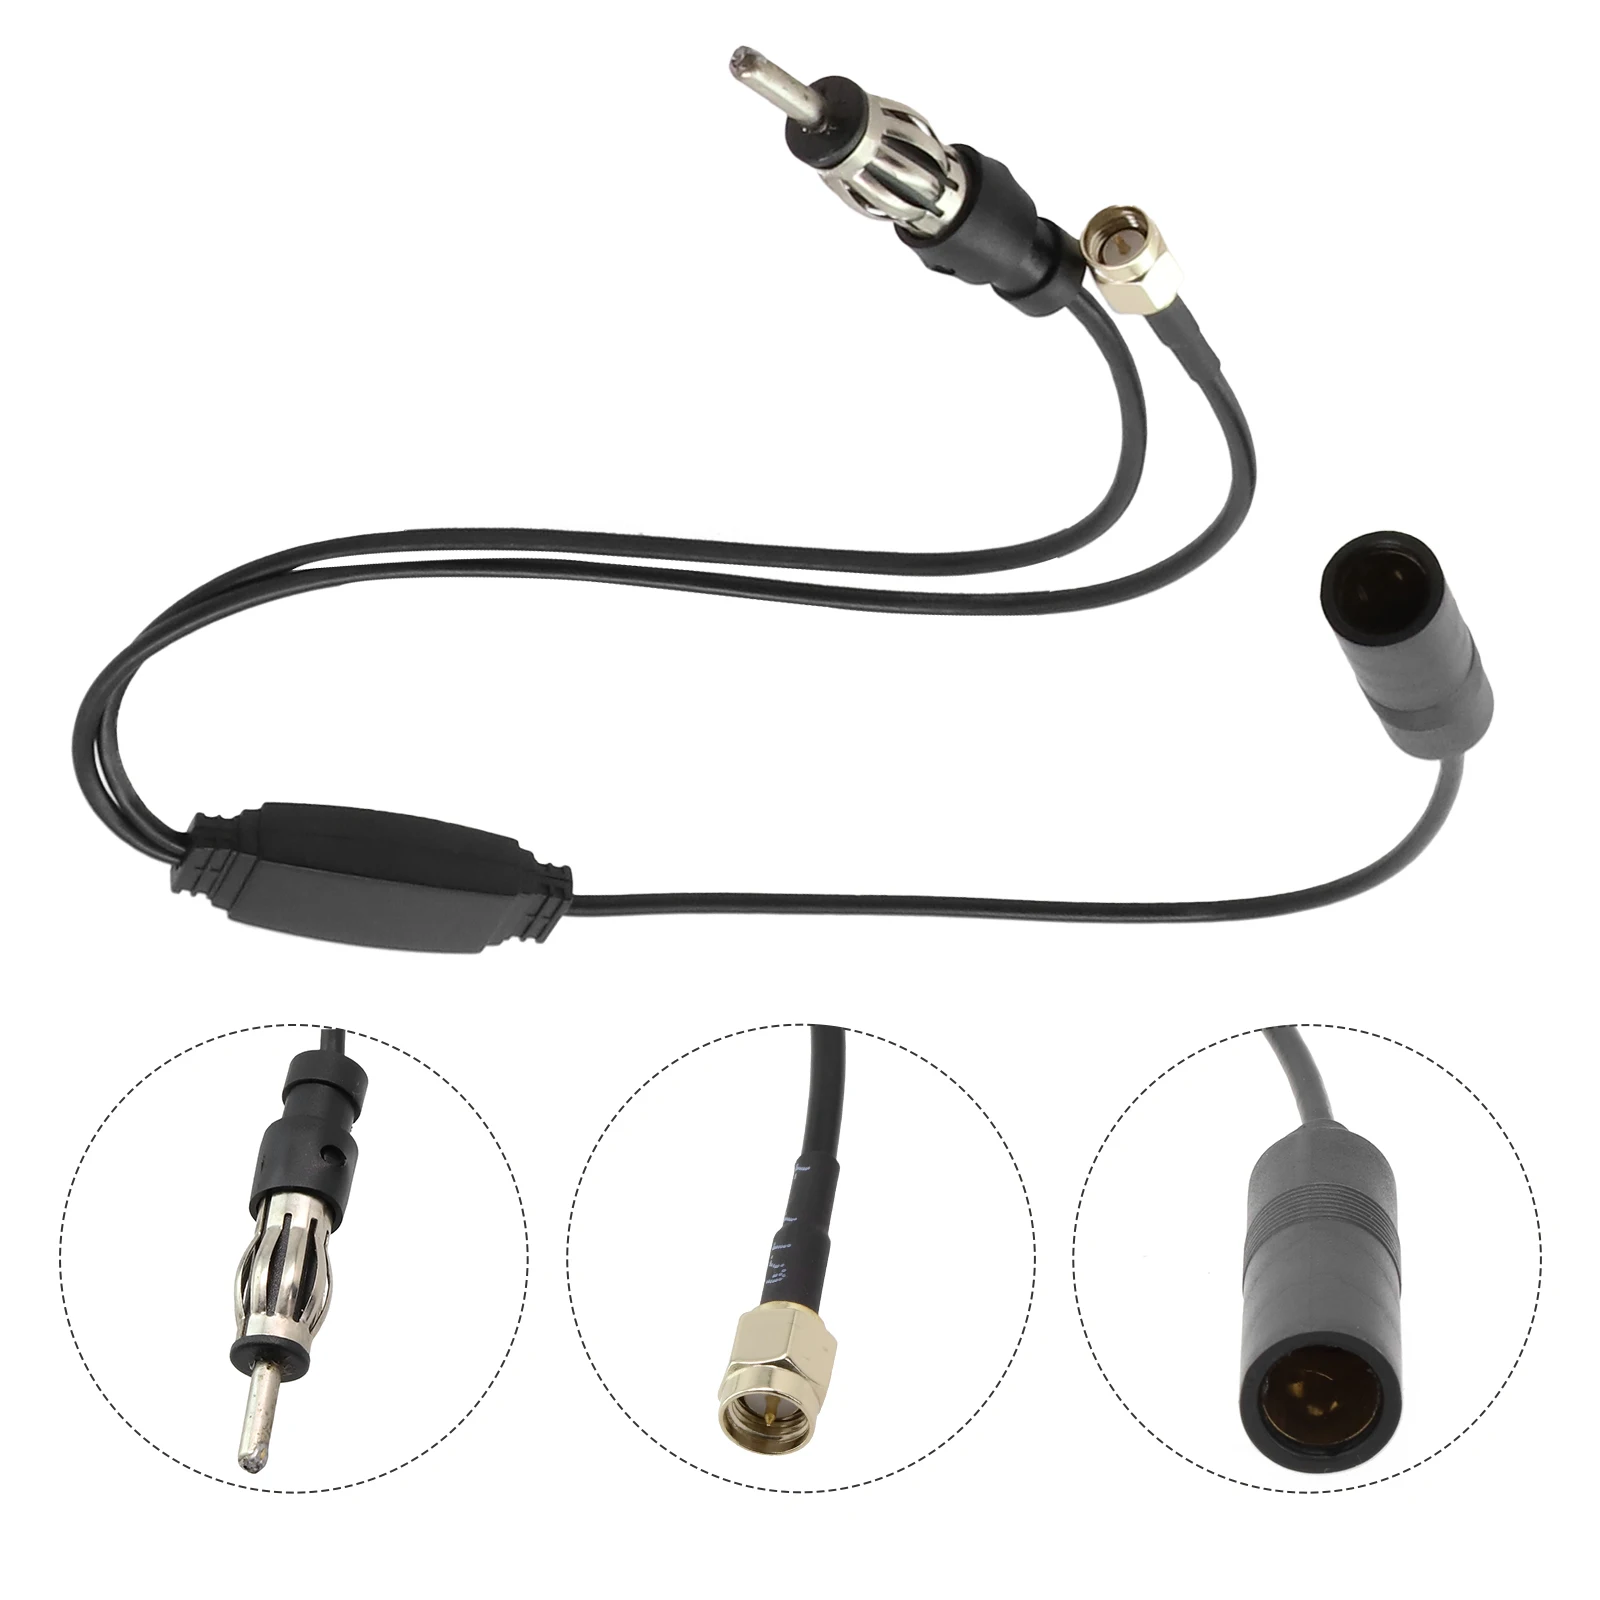 

Splitter Radio Converter Replacement SMA Converter Universal 1 Pc Adapter Cable Auto Parts Car Antenna Parts Durable